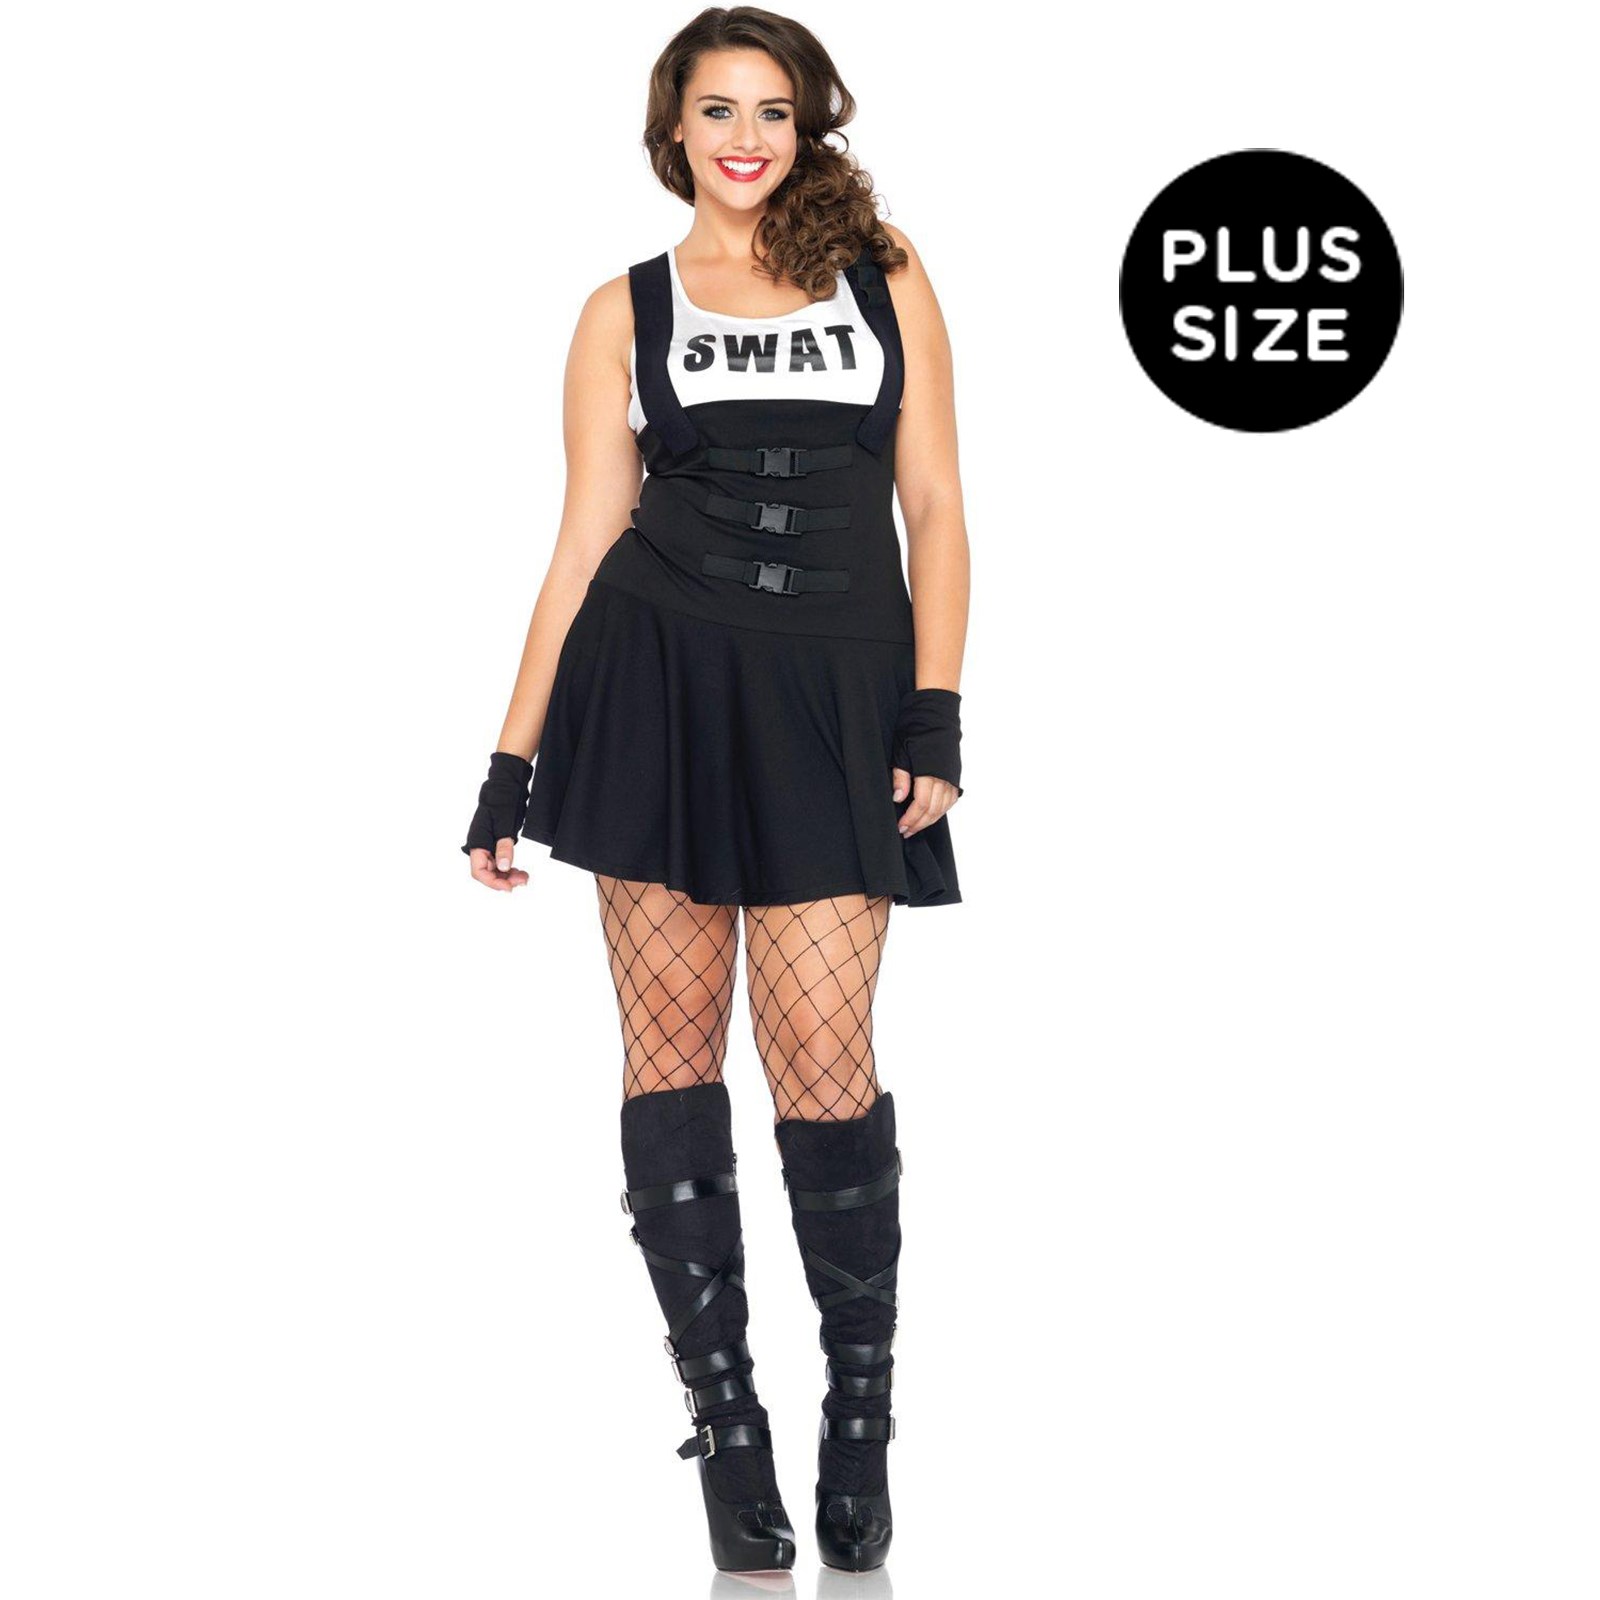 Sultry SWAT Officer Adult Plus Costume